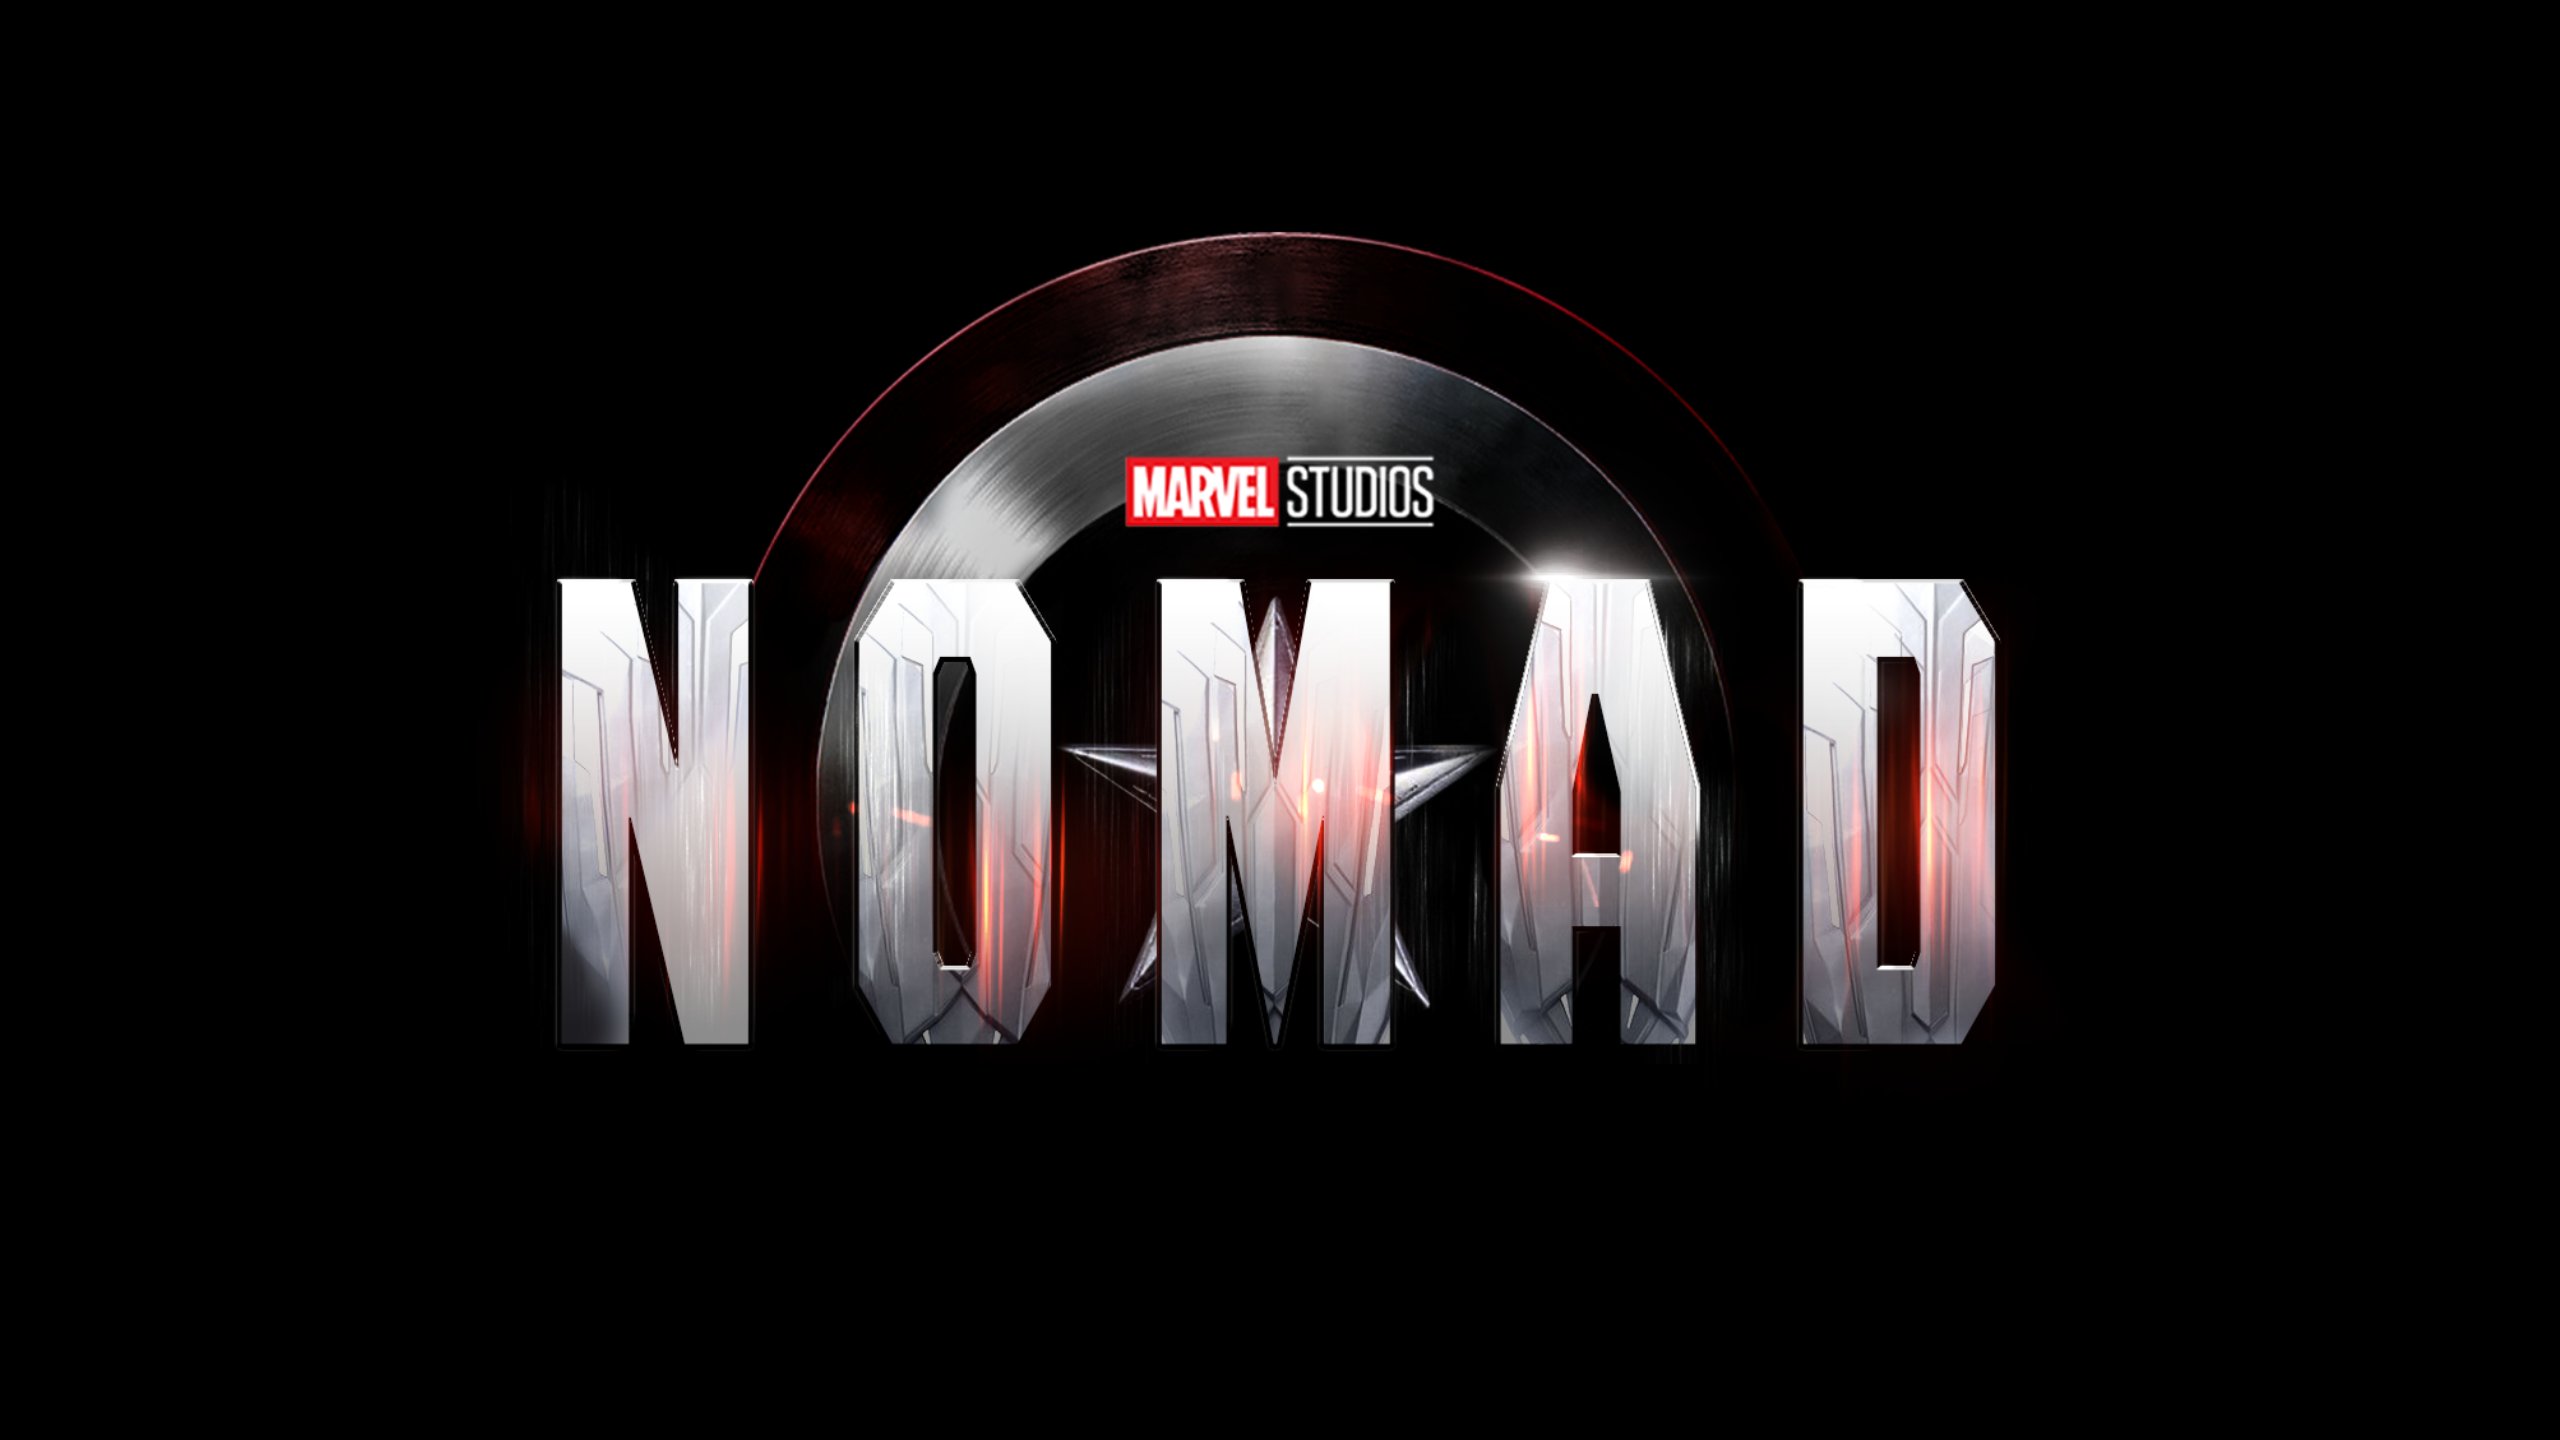 Marvel Updates on Twitter: "A project dedicated to Nomad is in production # Nomad #MarvelStudios #Marvel #DisneyPlus https://t.co/bl10oXrV0e" / Twitter